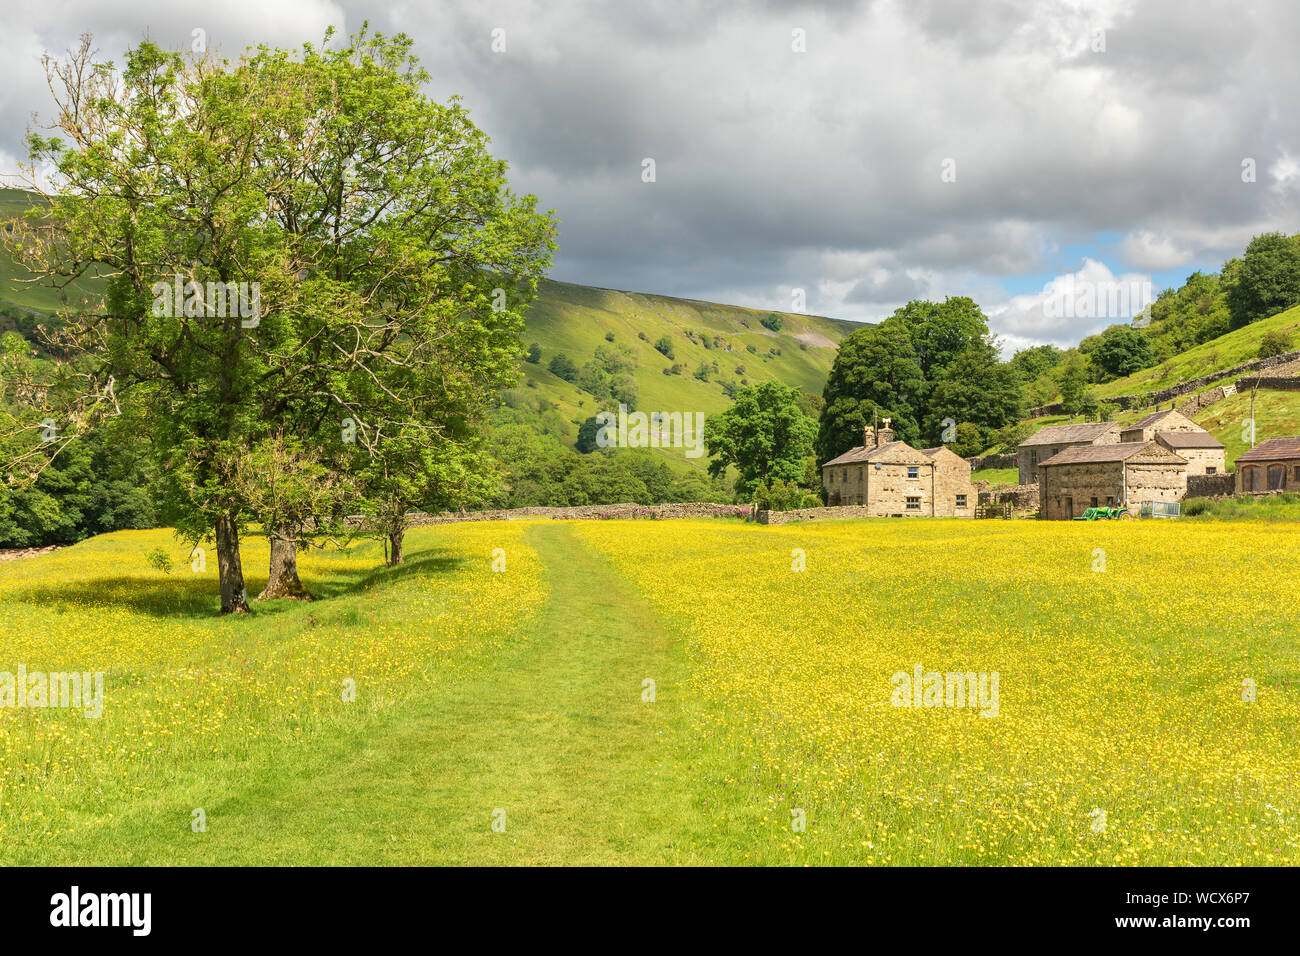 Swaledale meadows with barns and bright yellow buttercups. Stock Photo